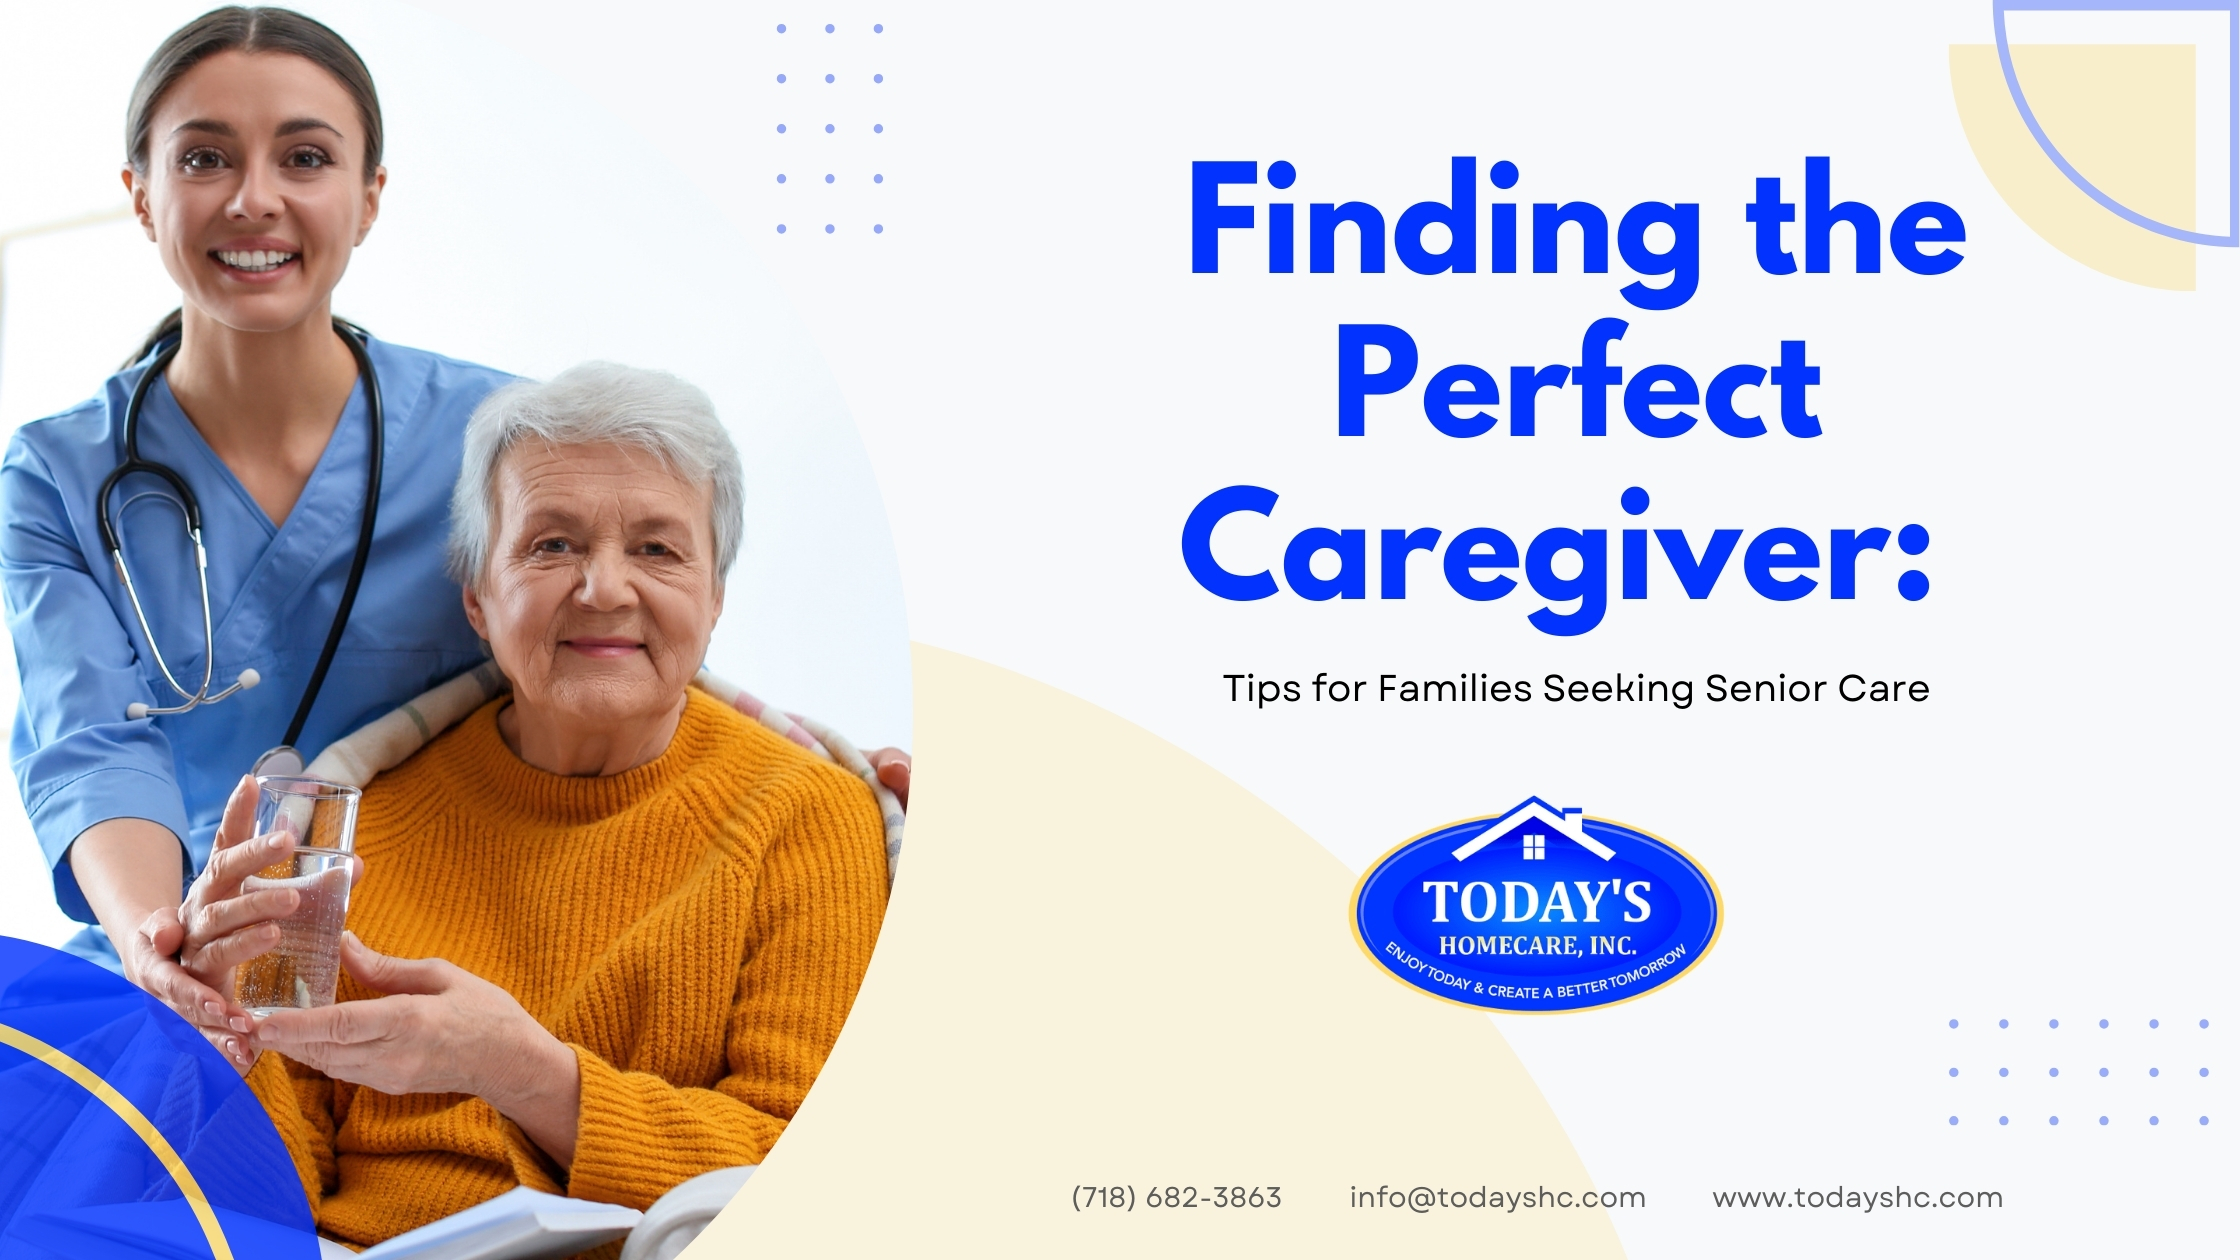 Finding the Perfect Caregiver Tips for Families Seeking Senior Care